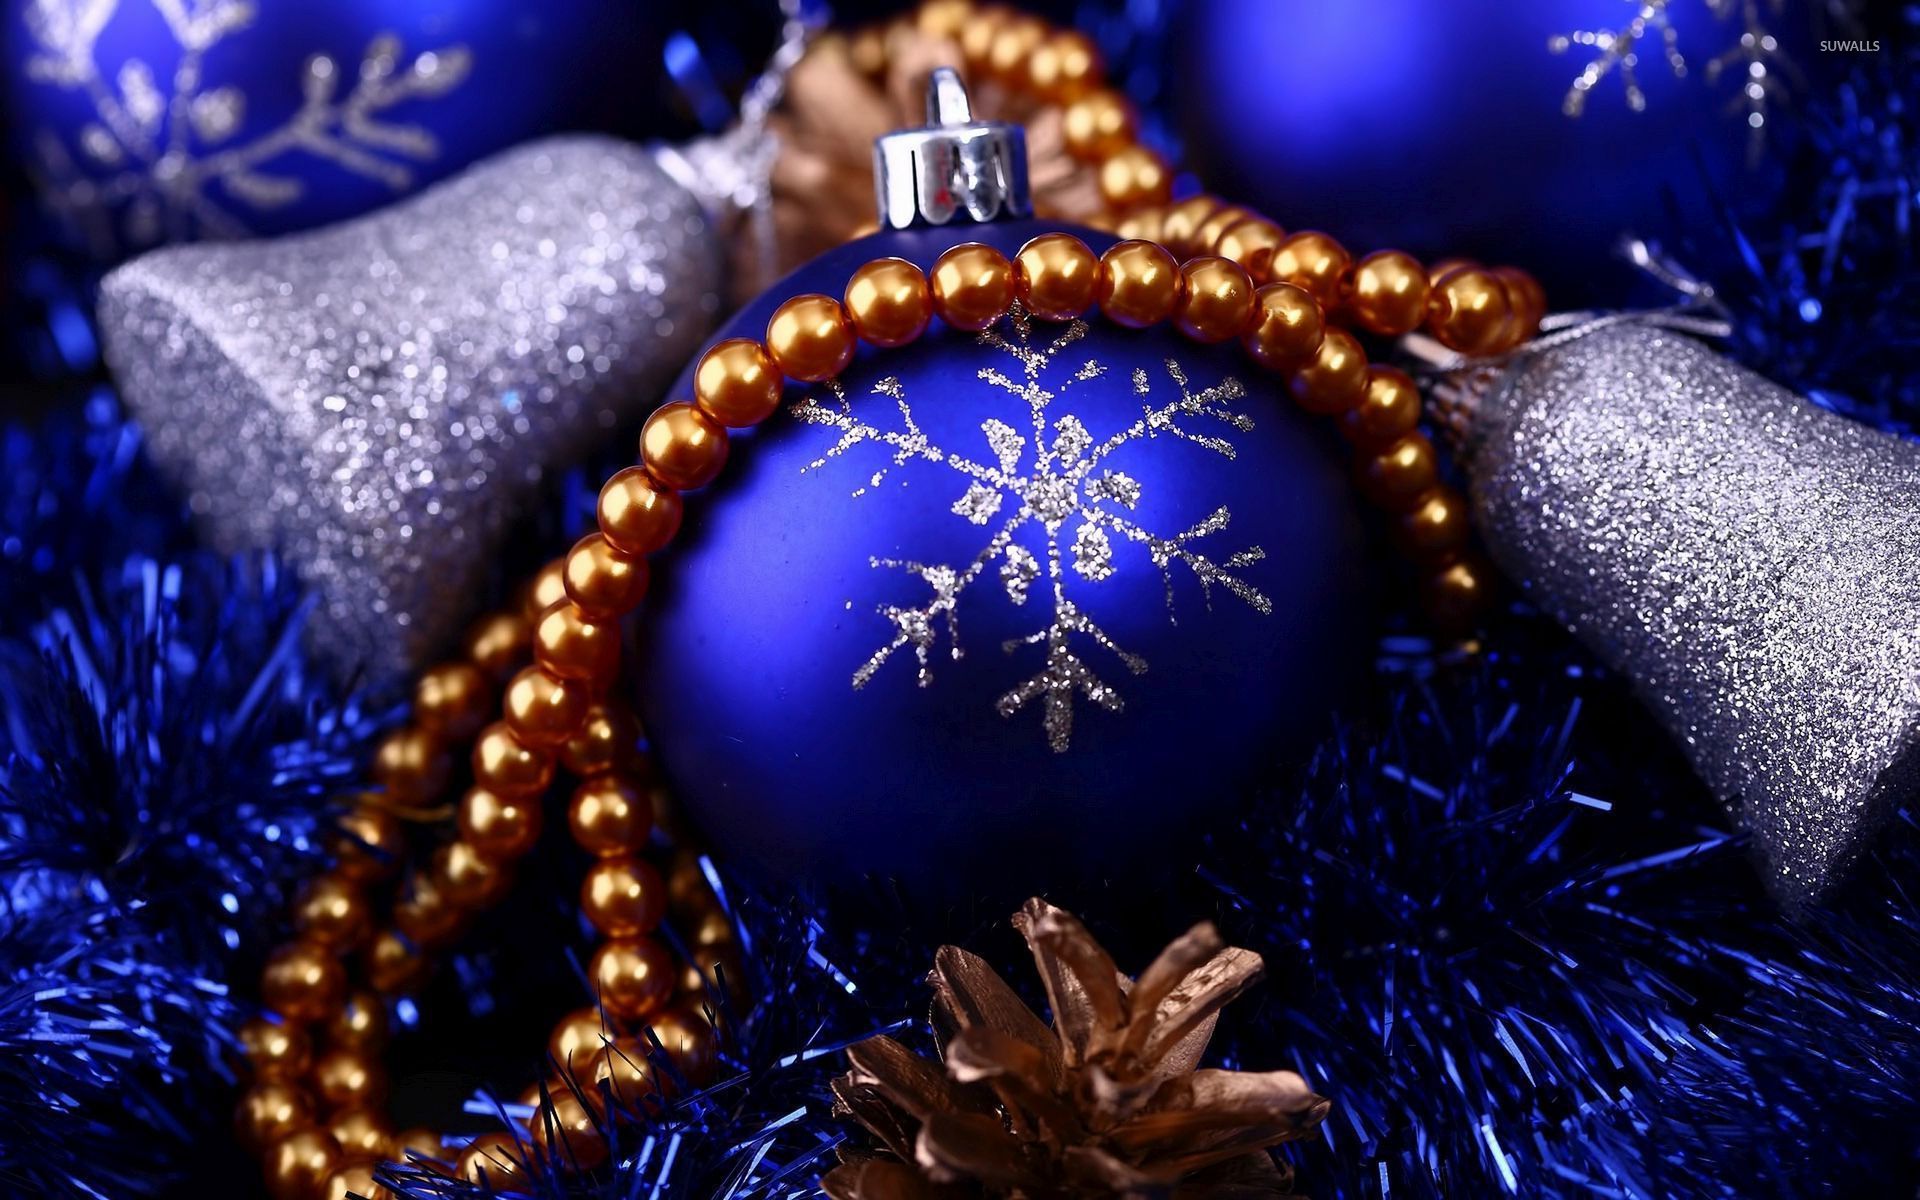 Silver snowflake on the blue bauble wallpaper - Holiday wallpapers - #52141